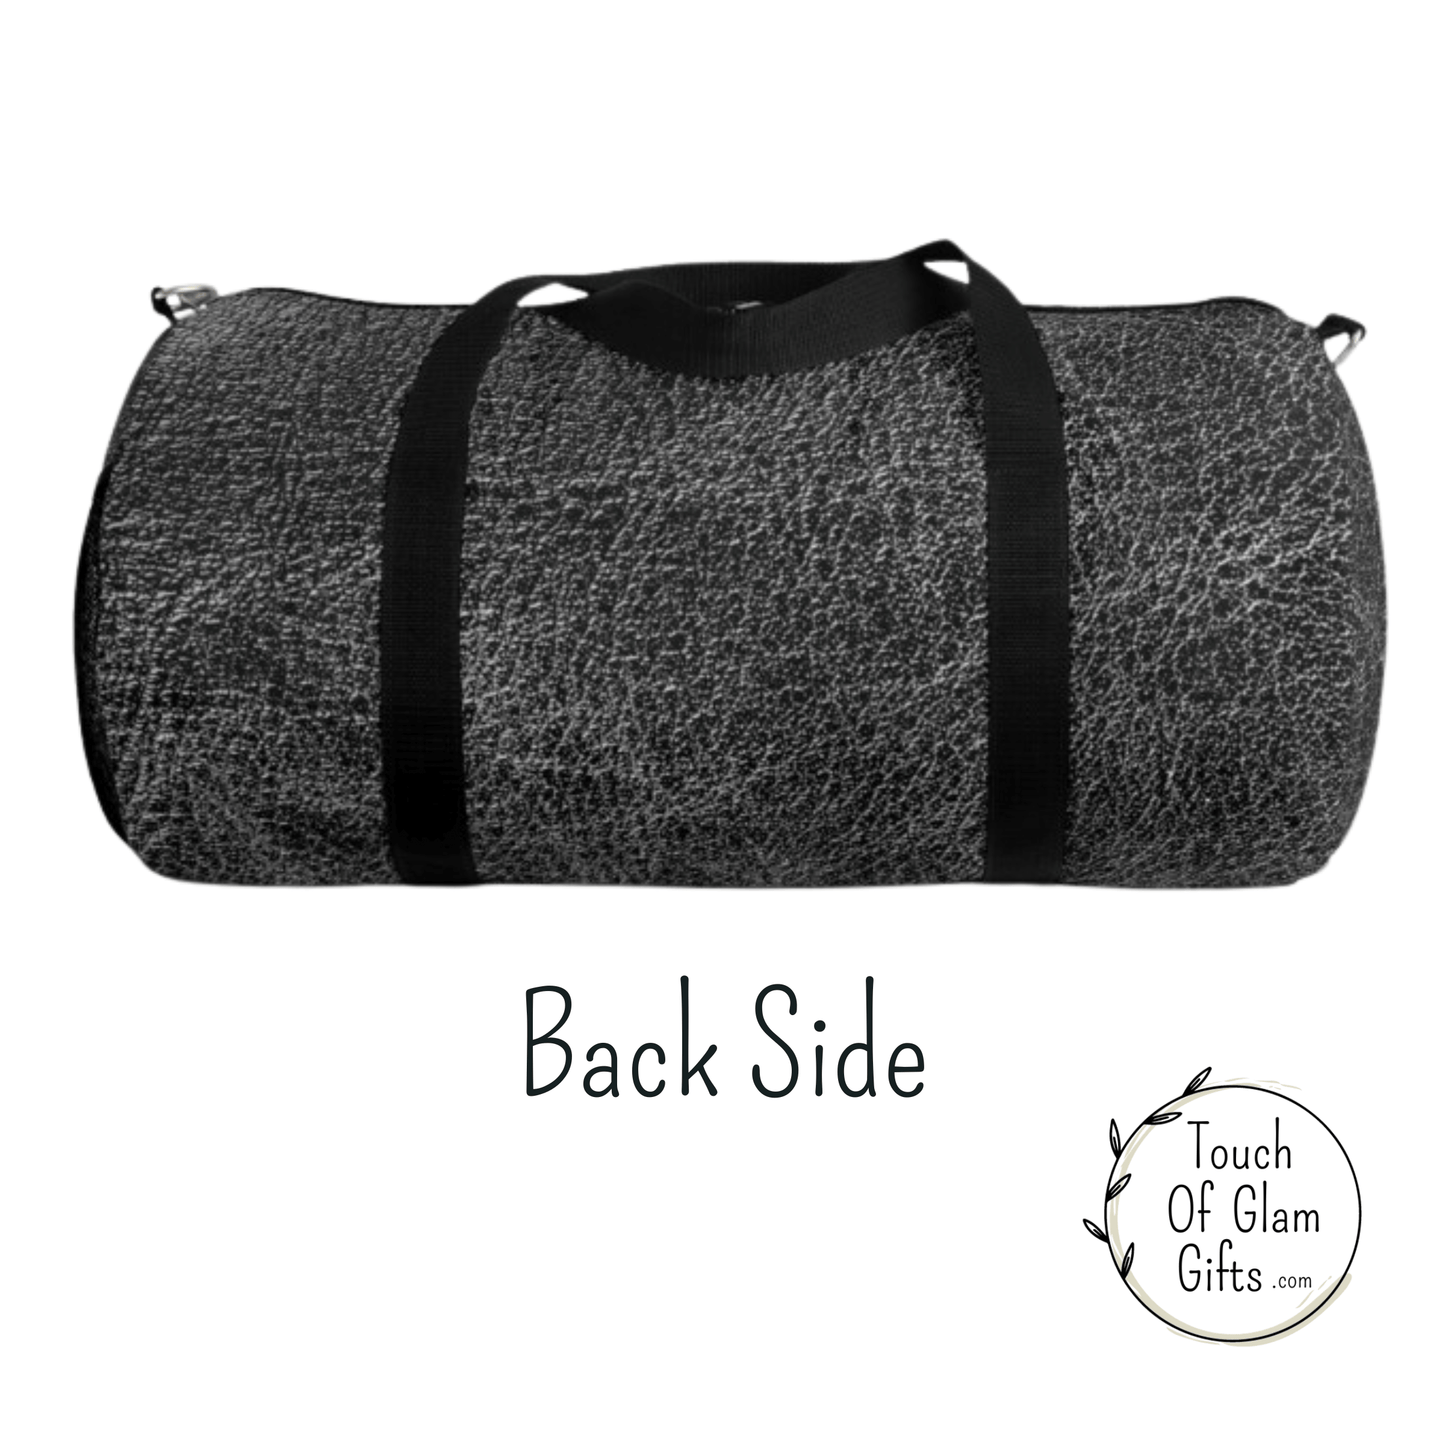 The back of our duffel bag is the same dark gray leather print on canvas. The small and large size bags are exactly the same.